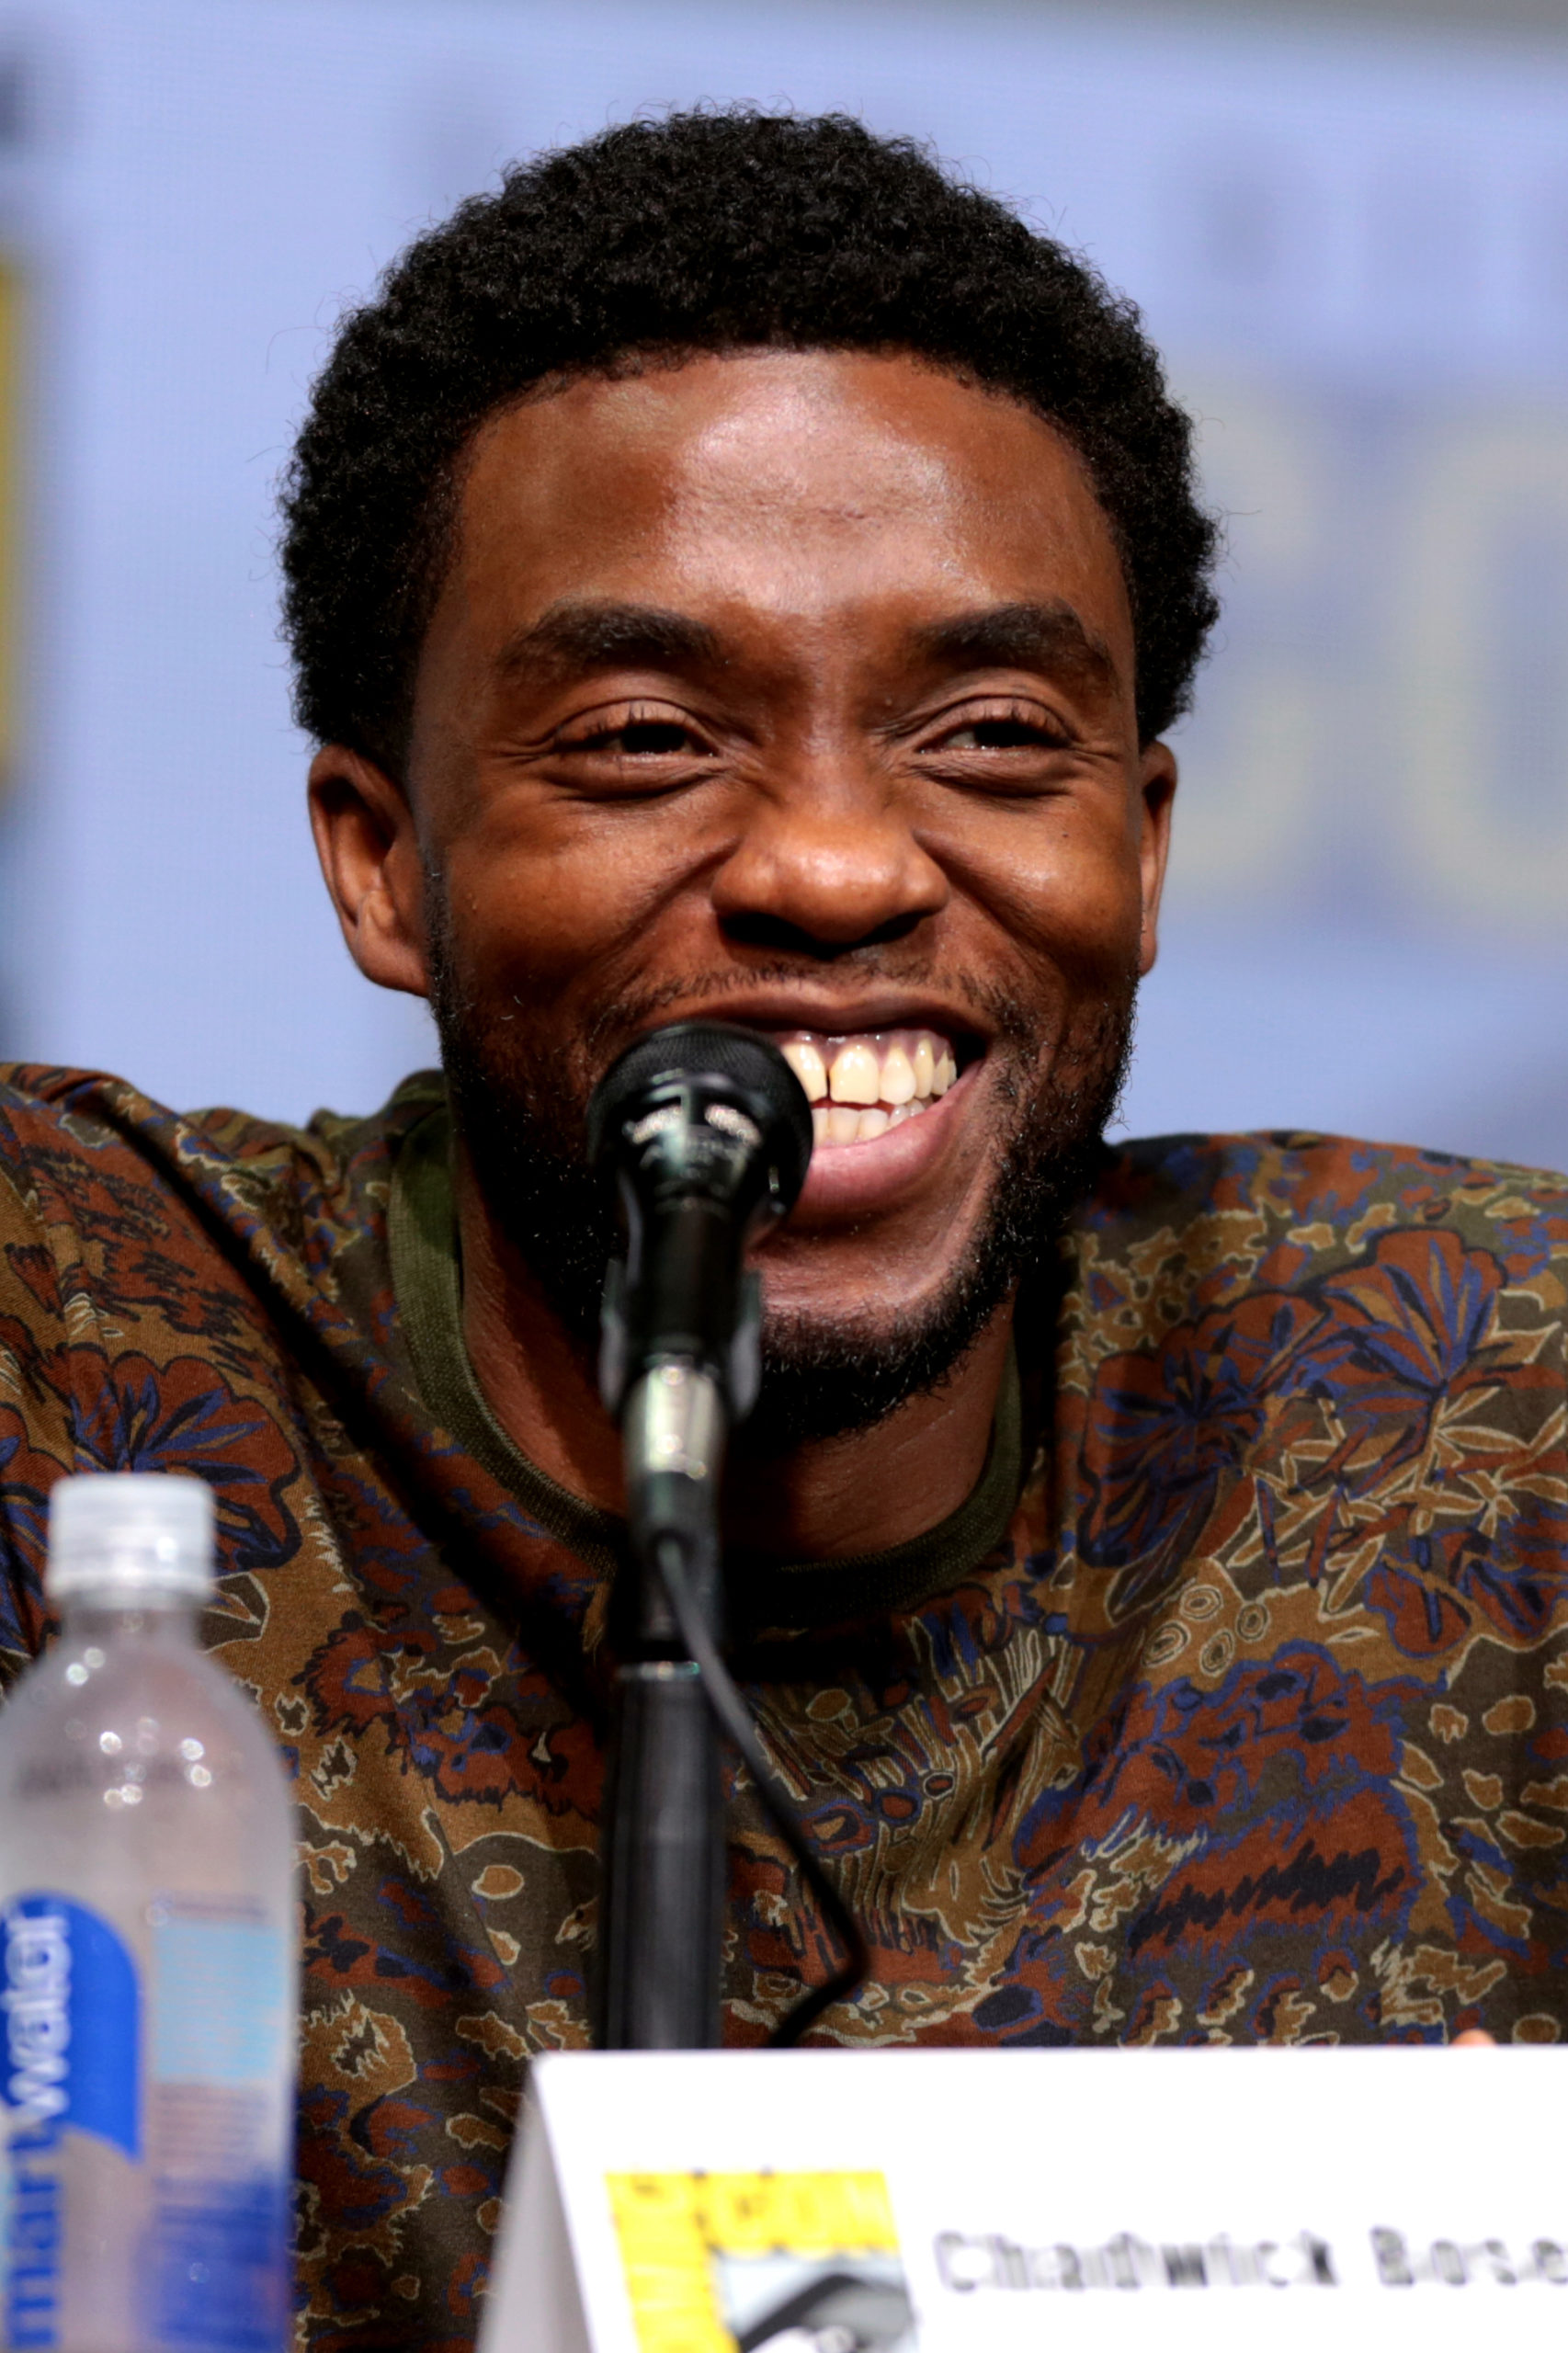 Disney+ Honours Chadwick Boseman On What Would Have Been His 44th Birthday